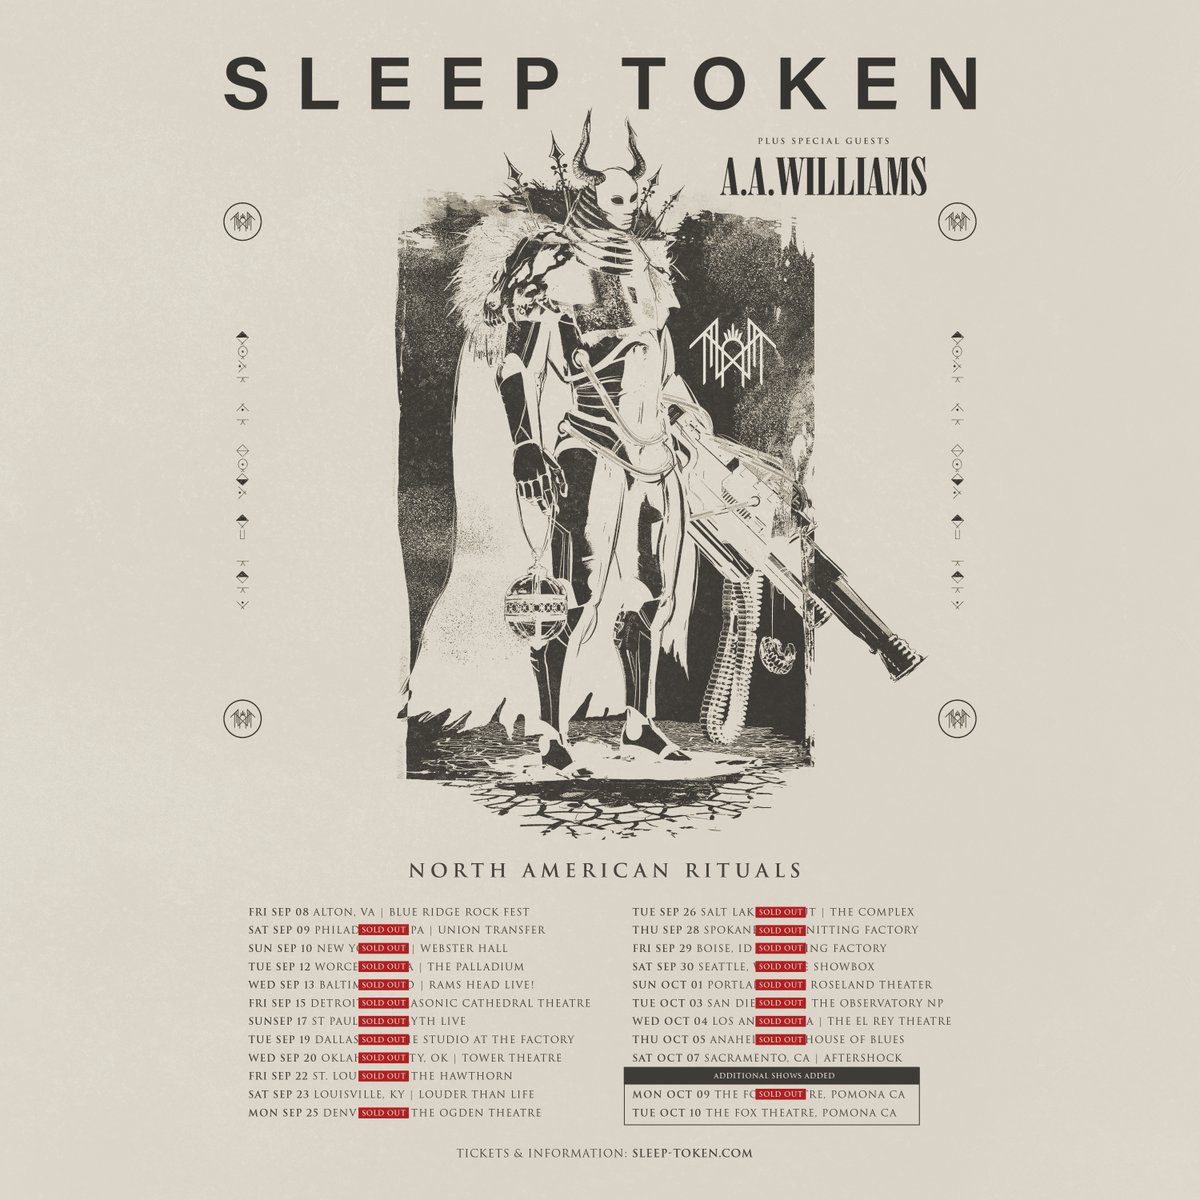 🙌 @aawilliamsmusic will join @Sleep_Token on their North American Rituals tour 🙌